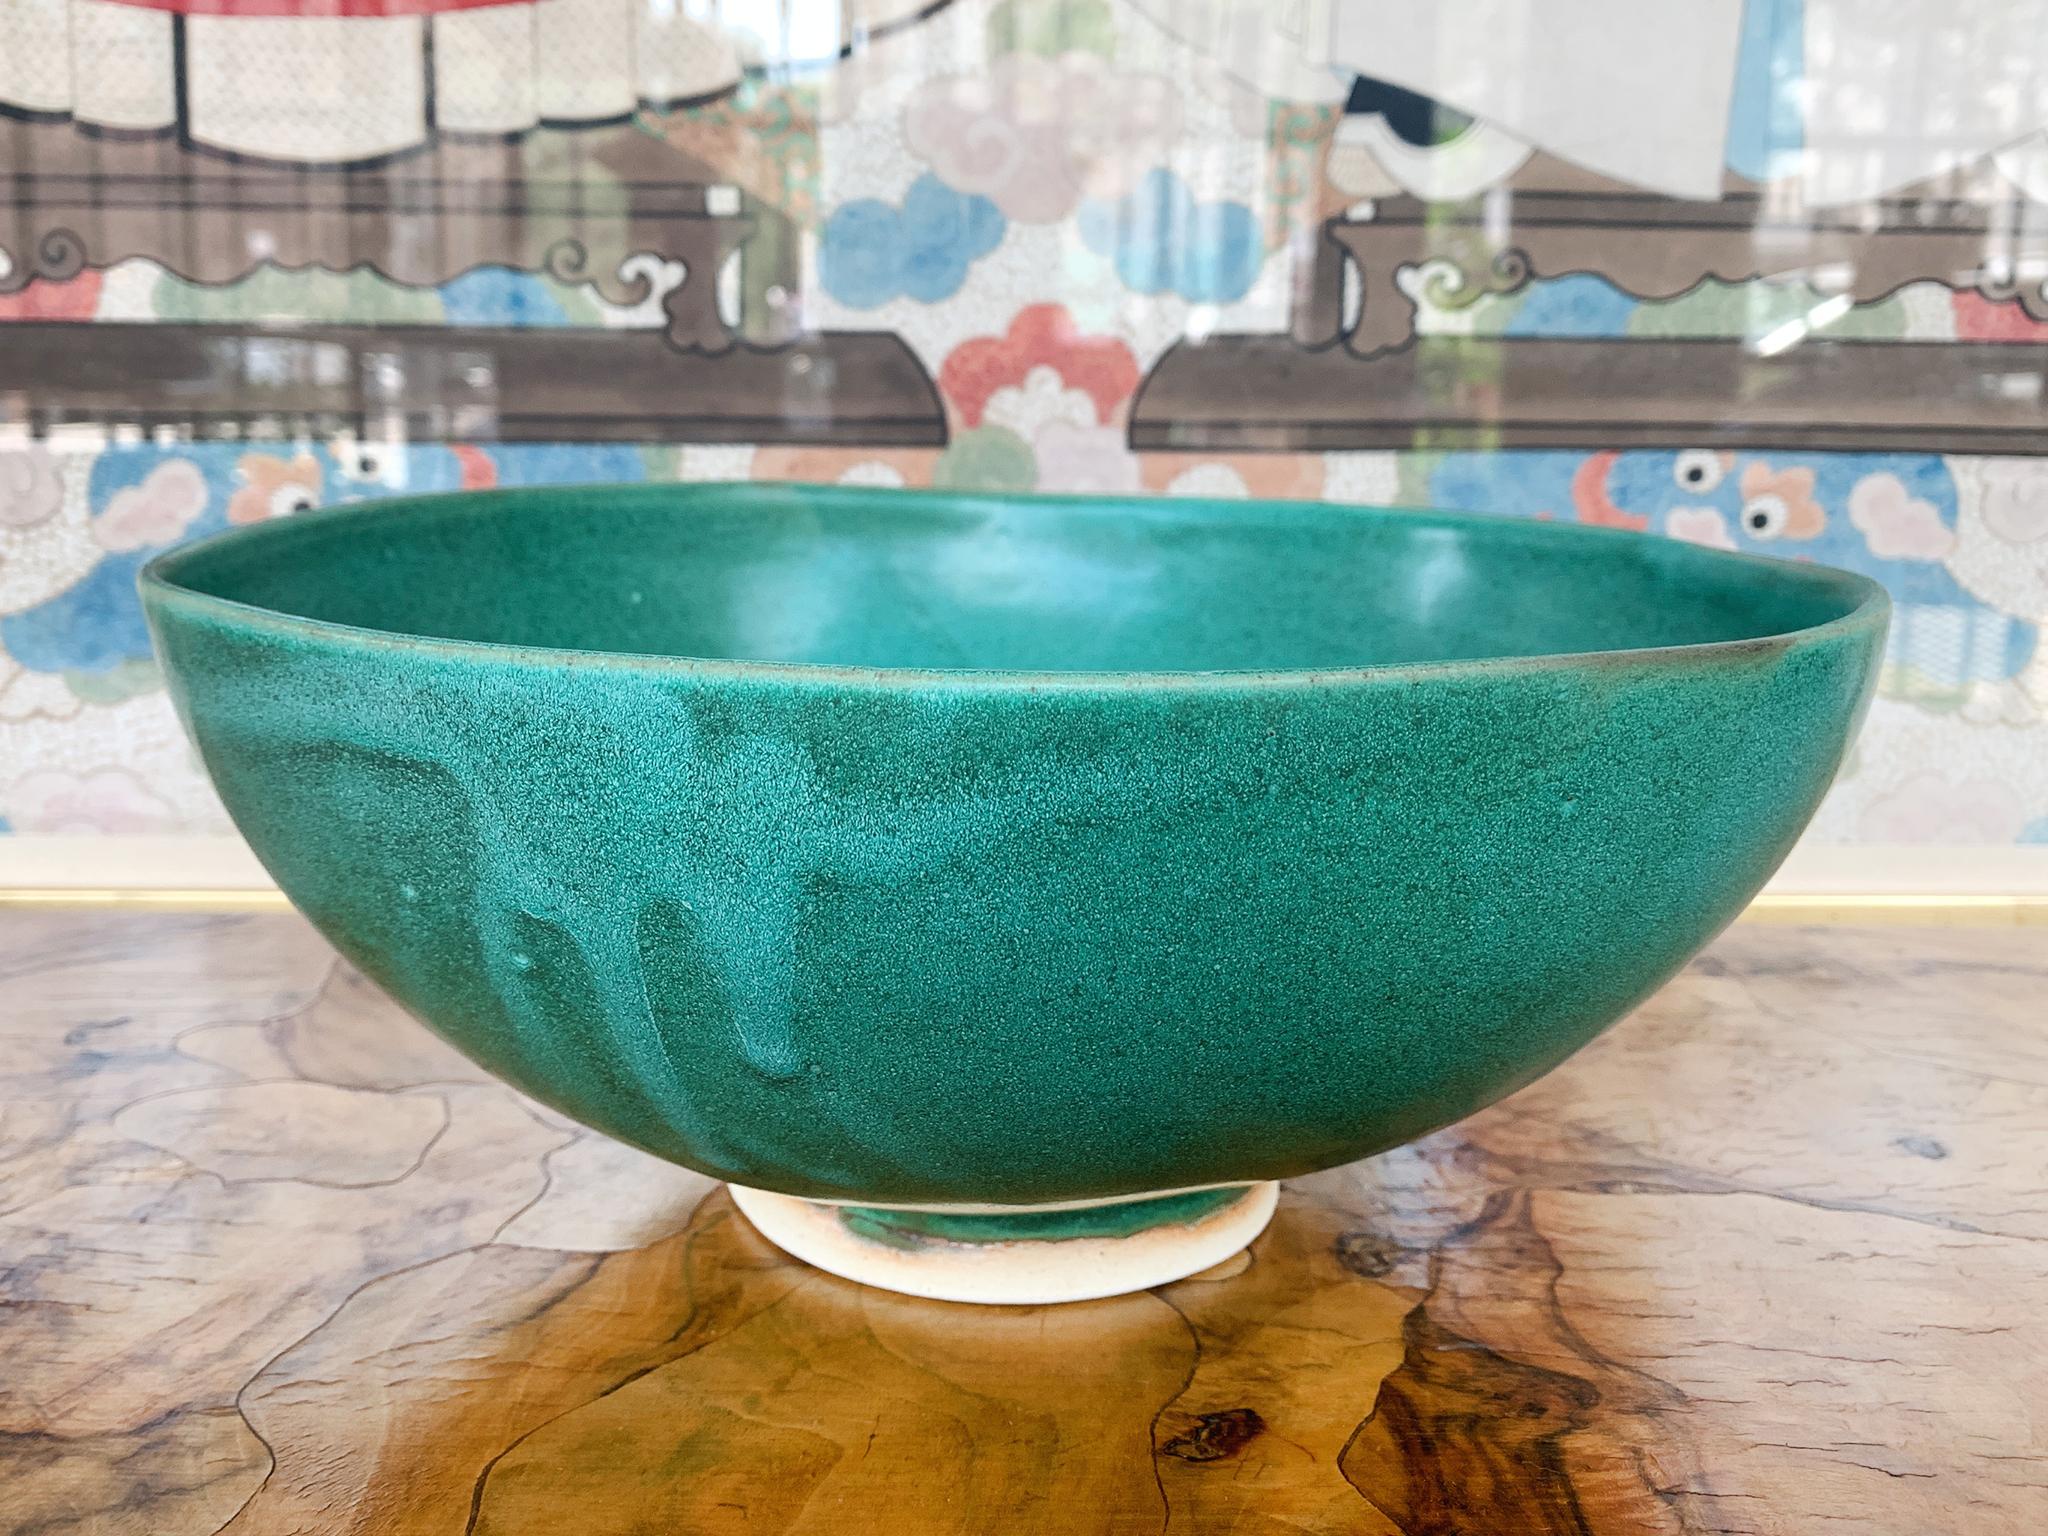 From Thom Lussier's Oxidized Copper Collection - a series of ceramic vessels that stand out for their brilliant palette and rich textures. This bowl is safe for food.

White stoneware with Cone 6 glaze.

Dimensions:
11 in. diameter
4.75 in.